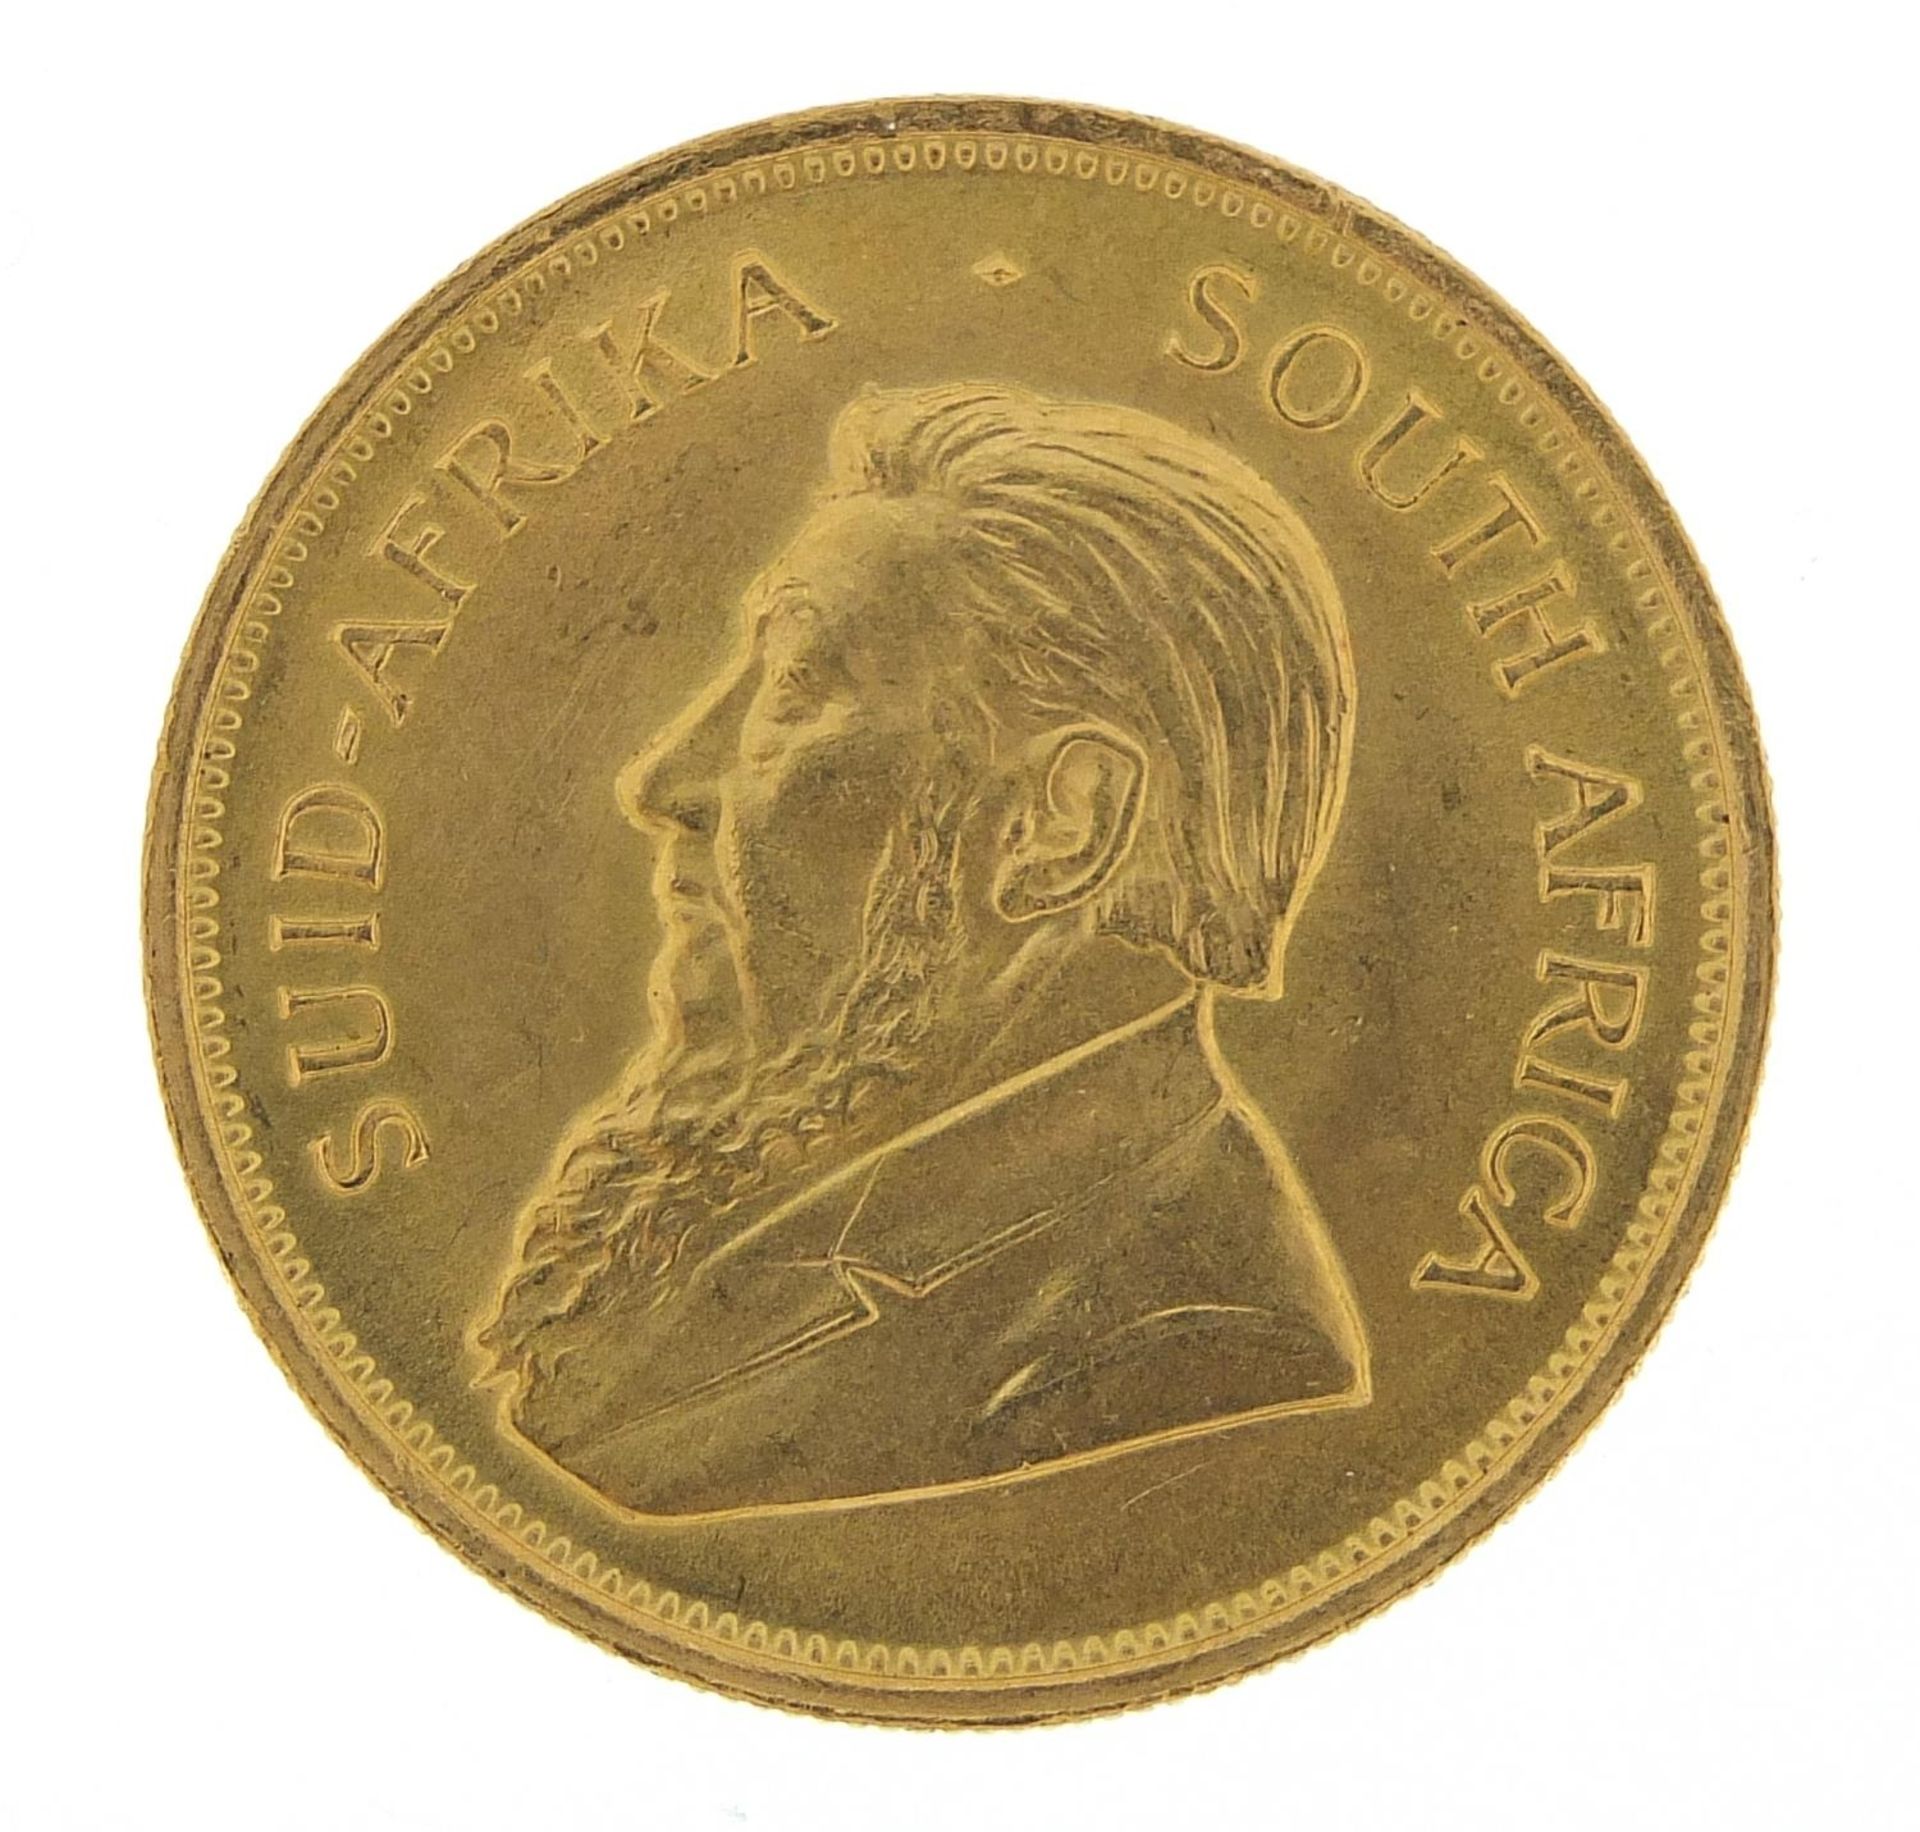 South African 1972 gold krugerrand - this lot is sold without buyer's premium - Image 2 of 3